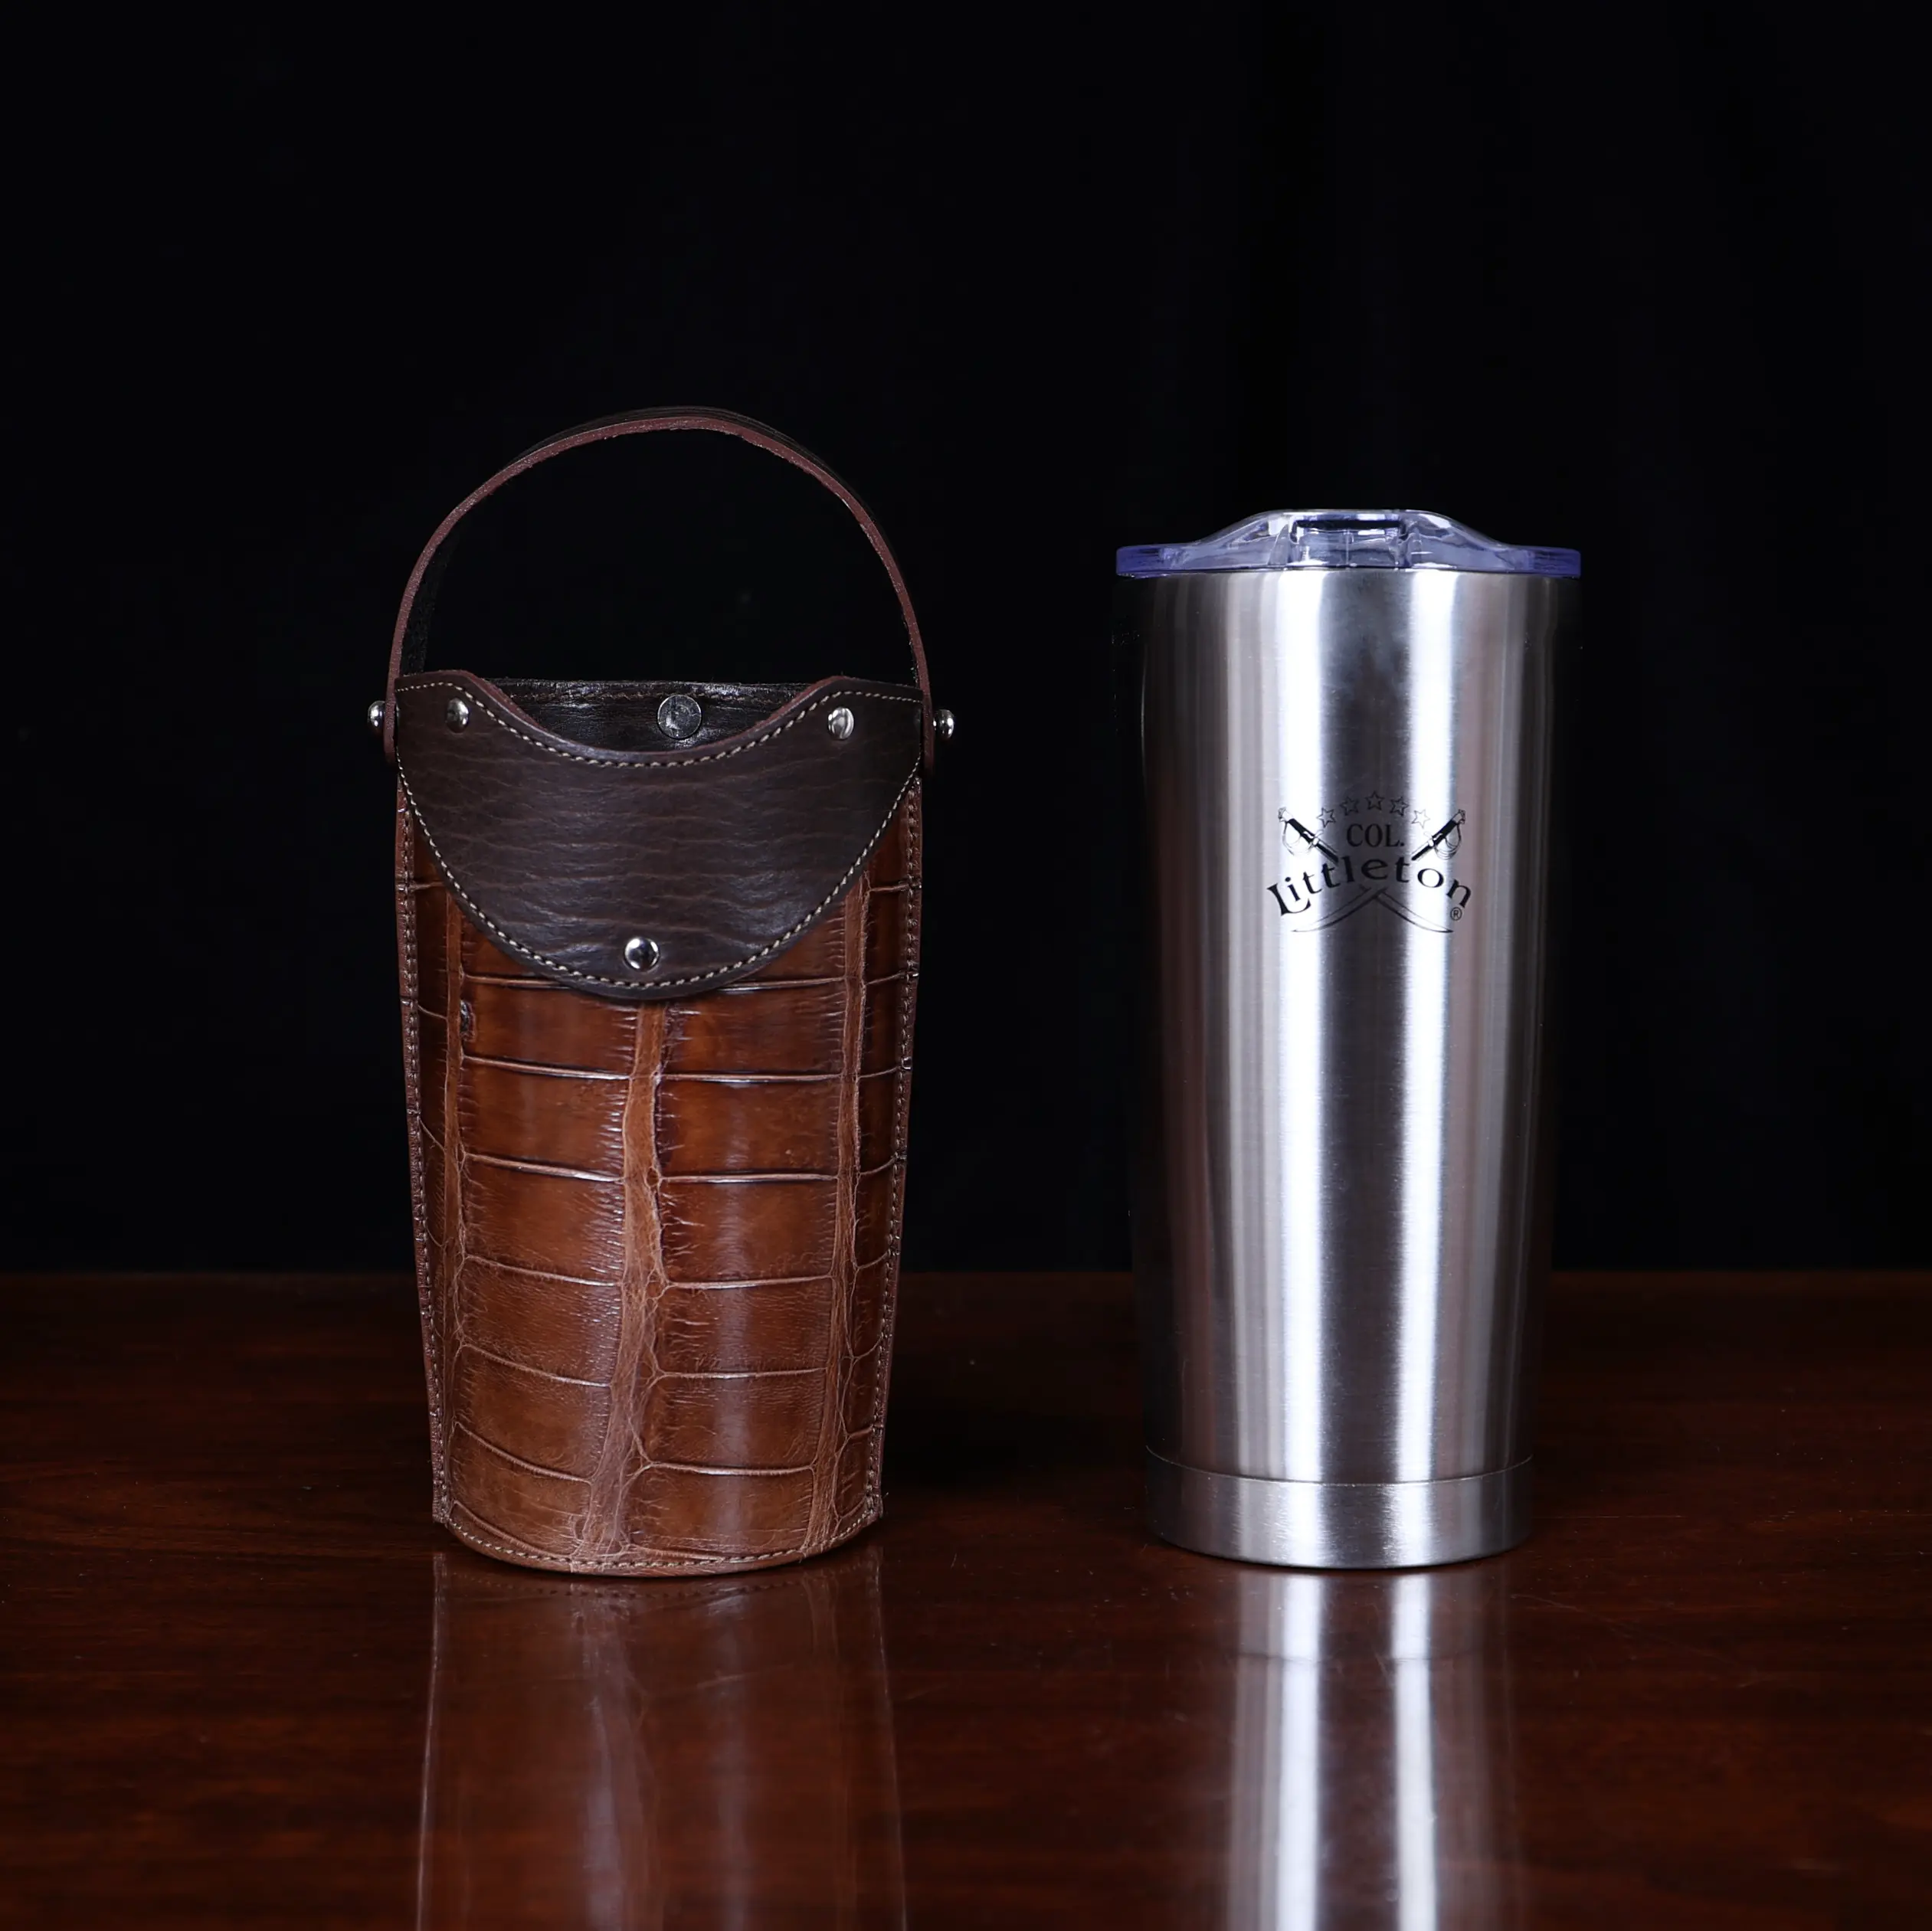 No. 20 Traveler Tumbler Sleeve Set in American Alligator with Tobacco Brown American Buffalo Trim - 20oz stainless steel tumbler - ID 001 - front view with cup on a black background